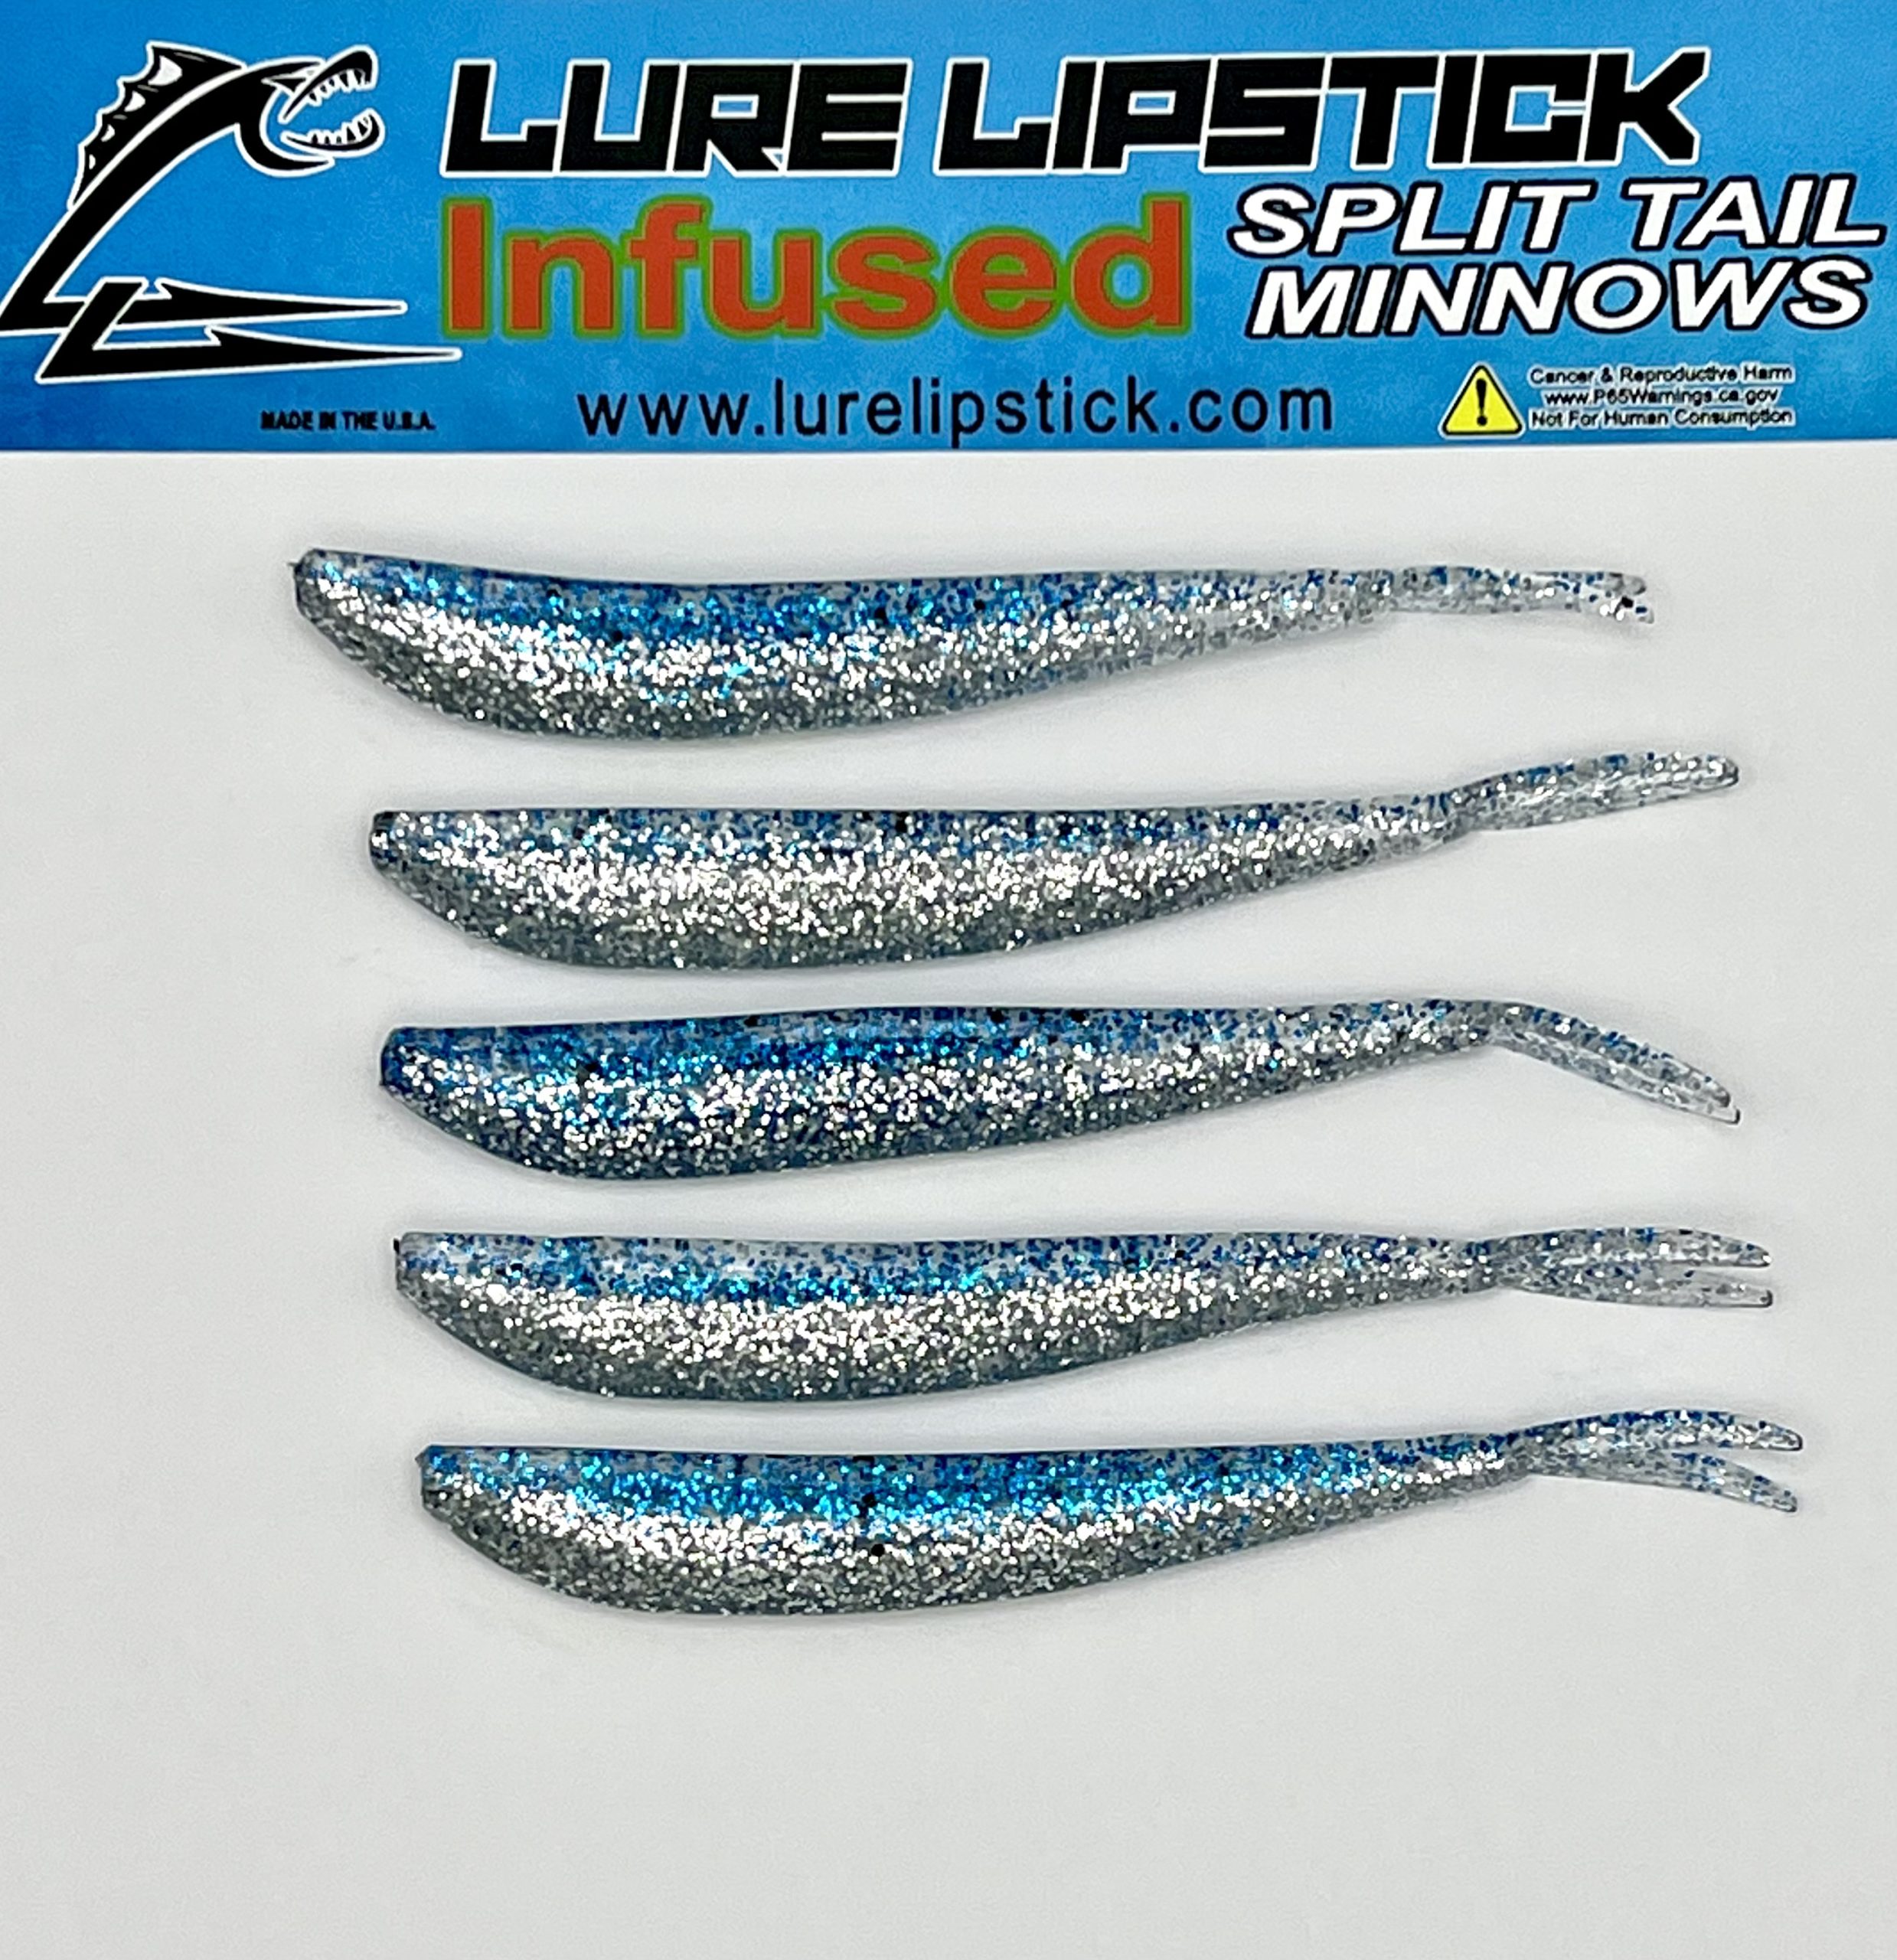 4 INCH 5 PACK - CUSTOM SCENTED SPLIT TAIL MINNOWS - BLUE ICE